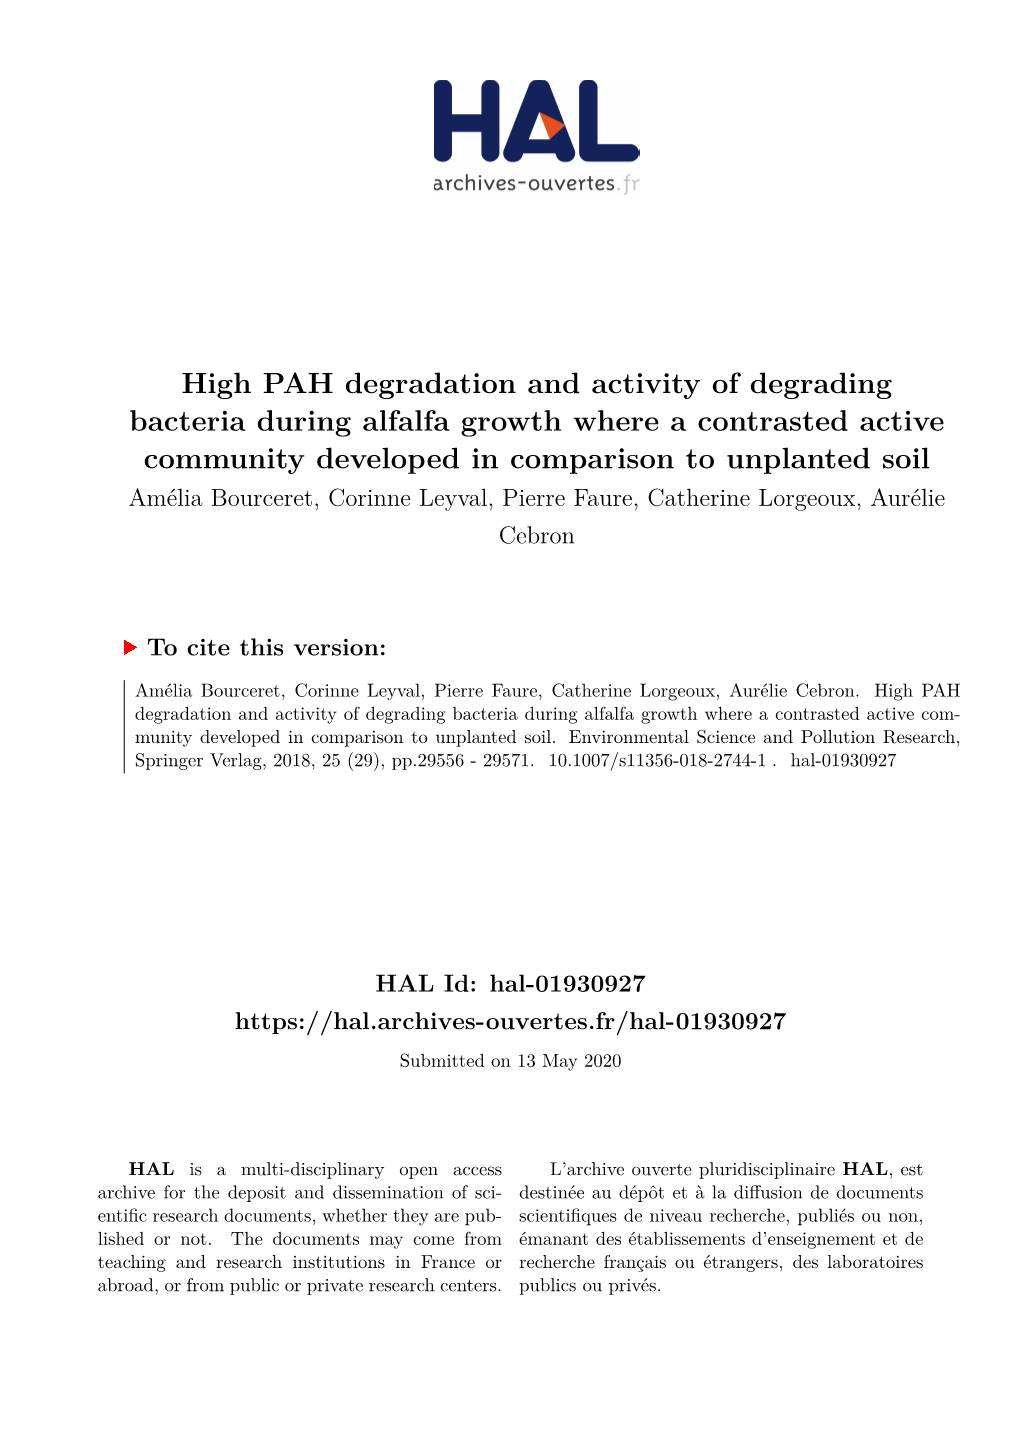 High PAH Degradation and Activity of Degrading Bacteria During Alfalfa